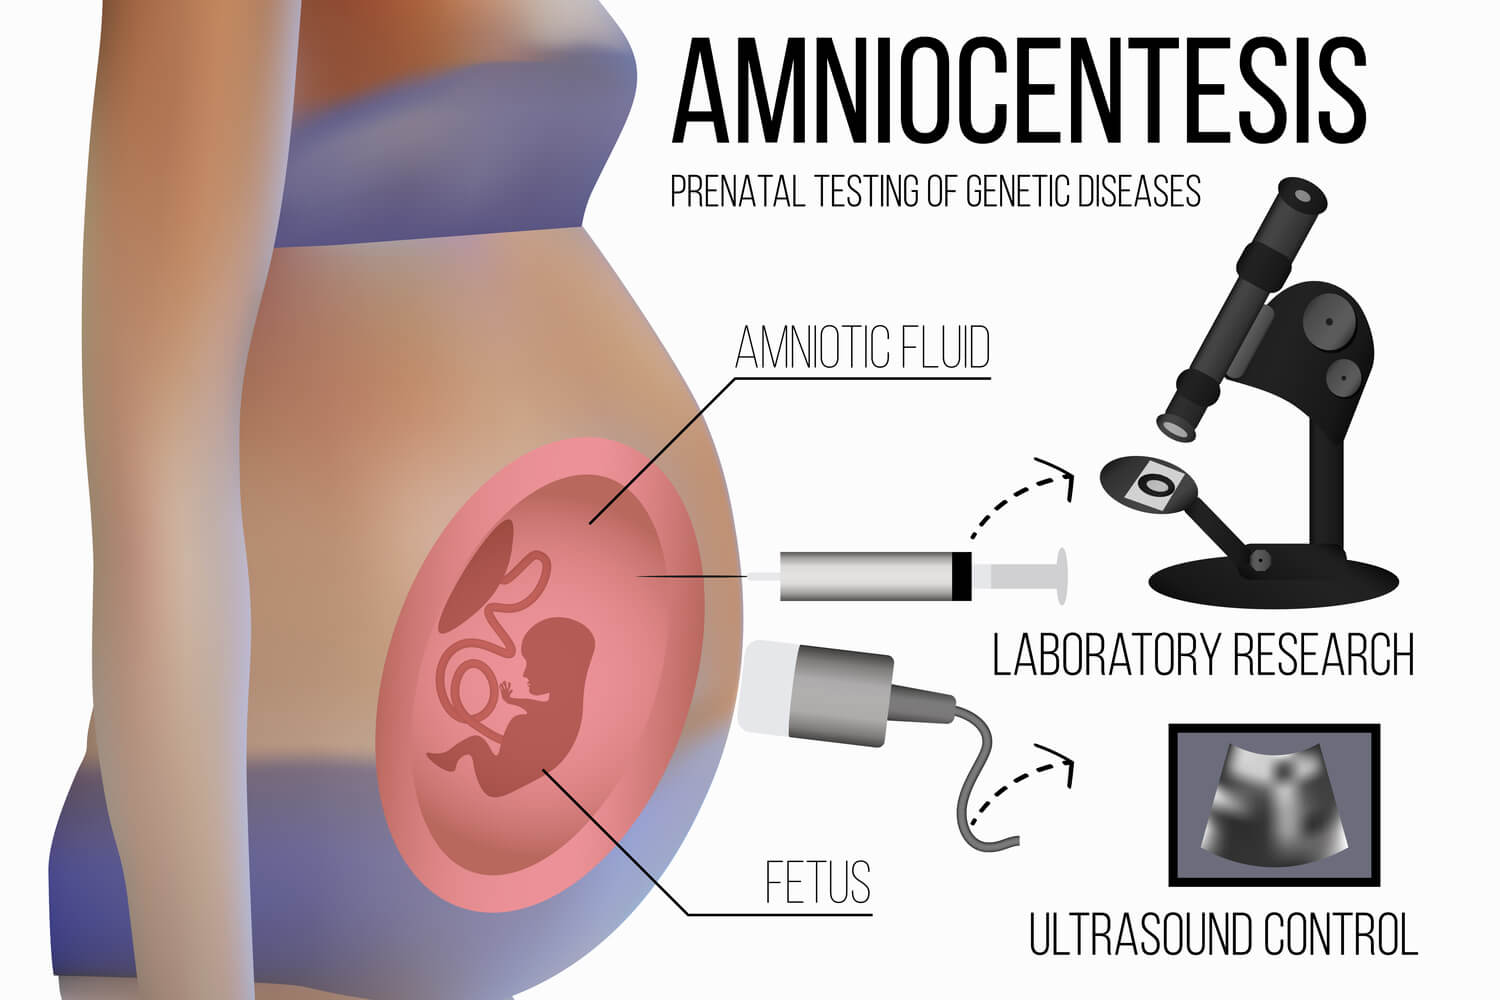 amniocentesis test to check genetic isse